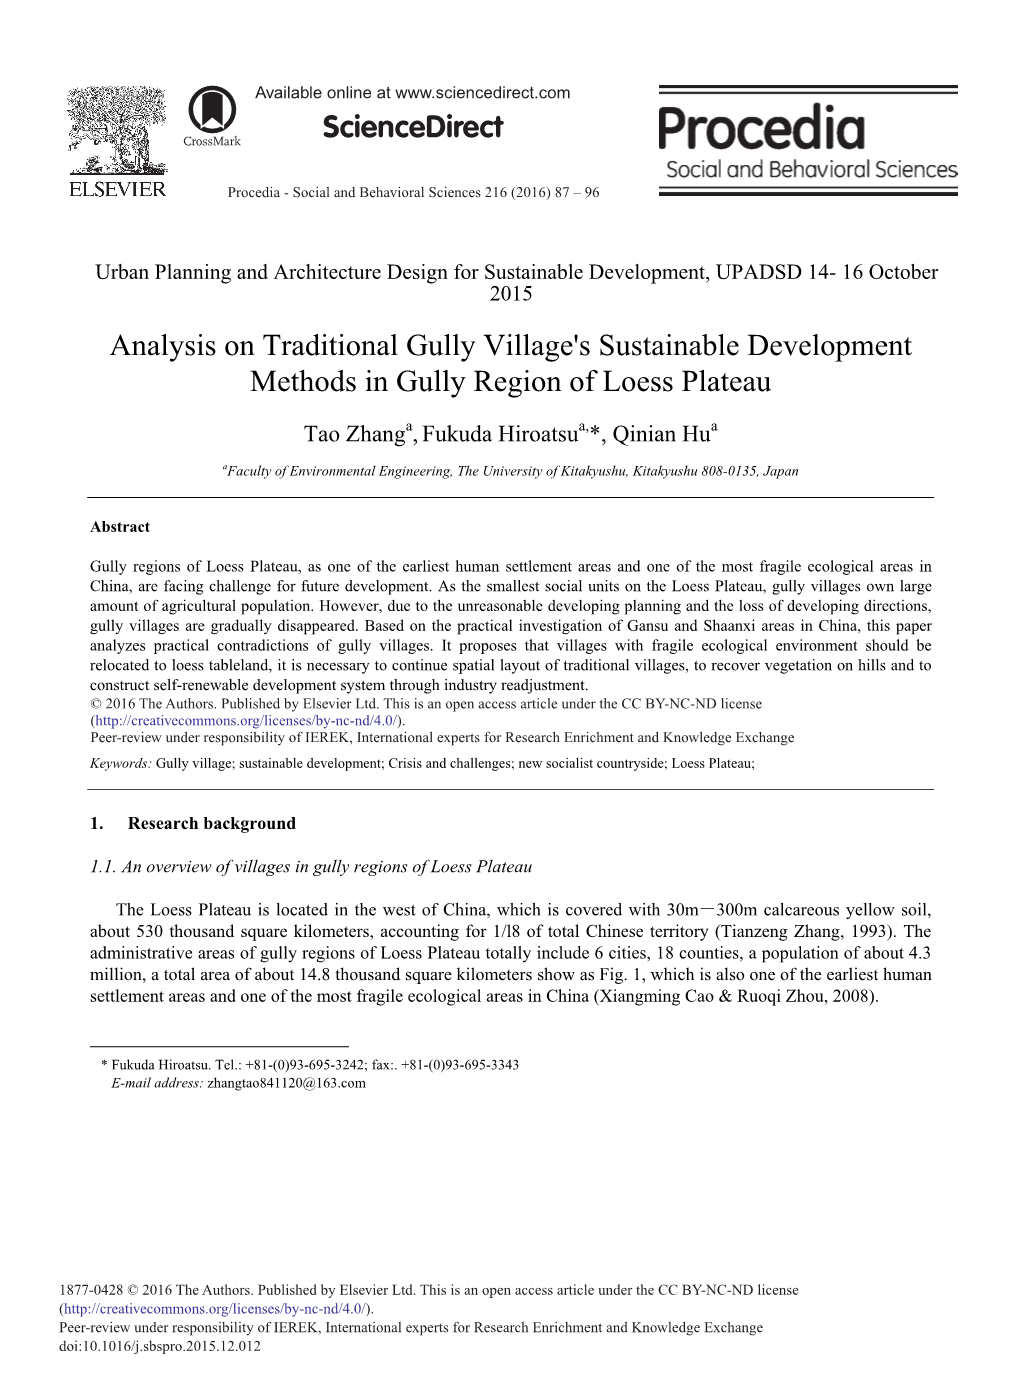 Analysis on Traditional Gully Village's Sustainable Development Methods in Gully Region of Loess Plateau